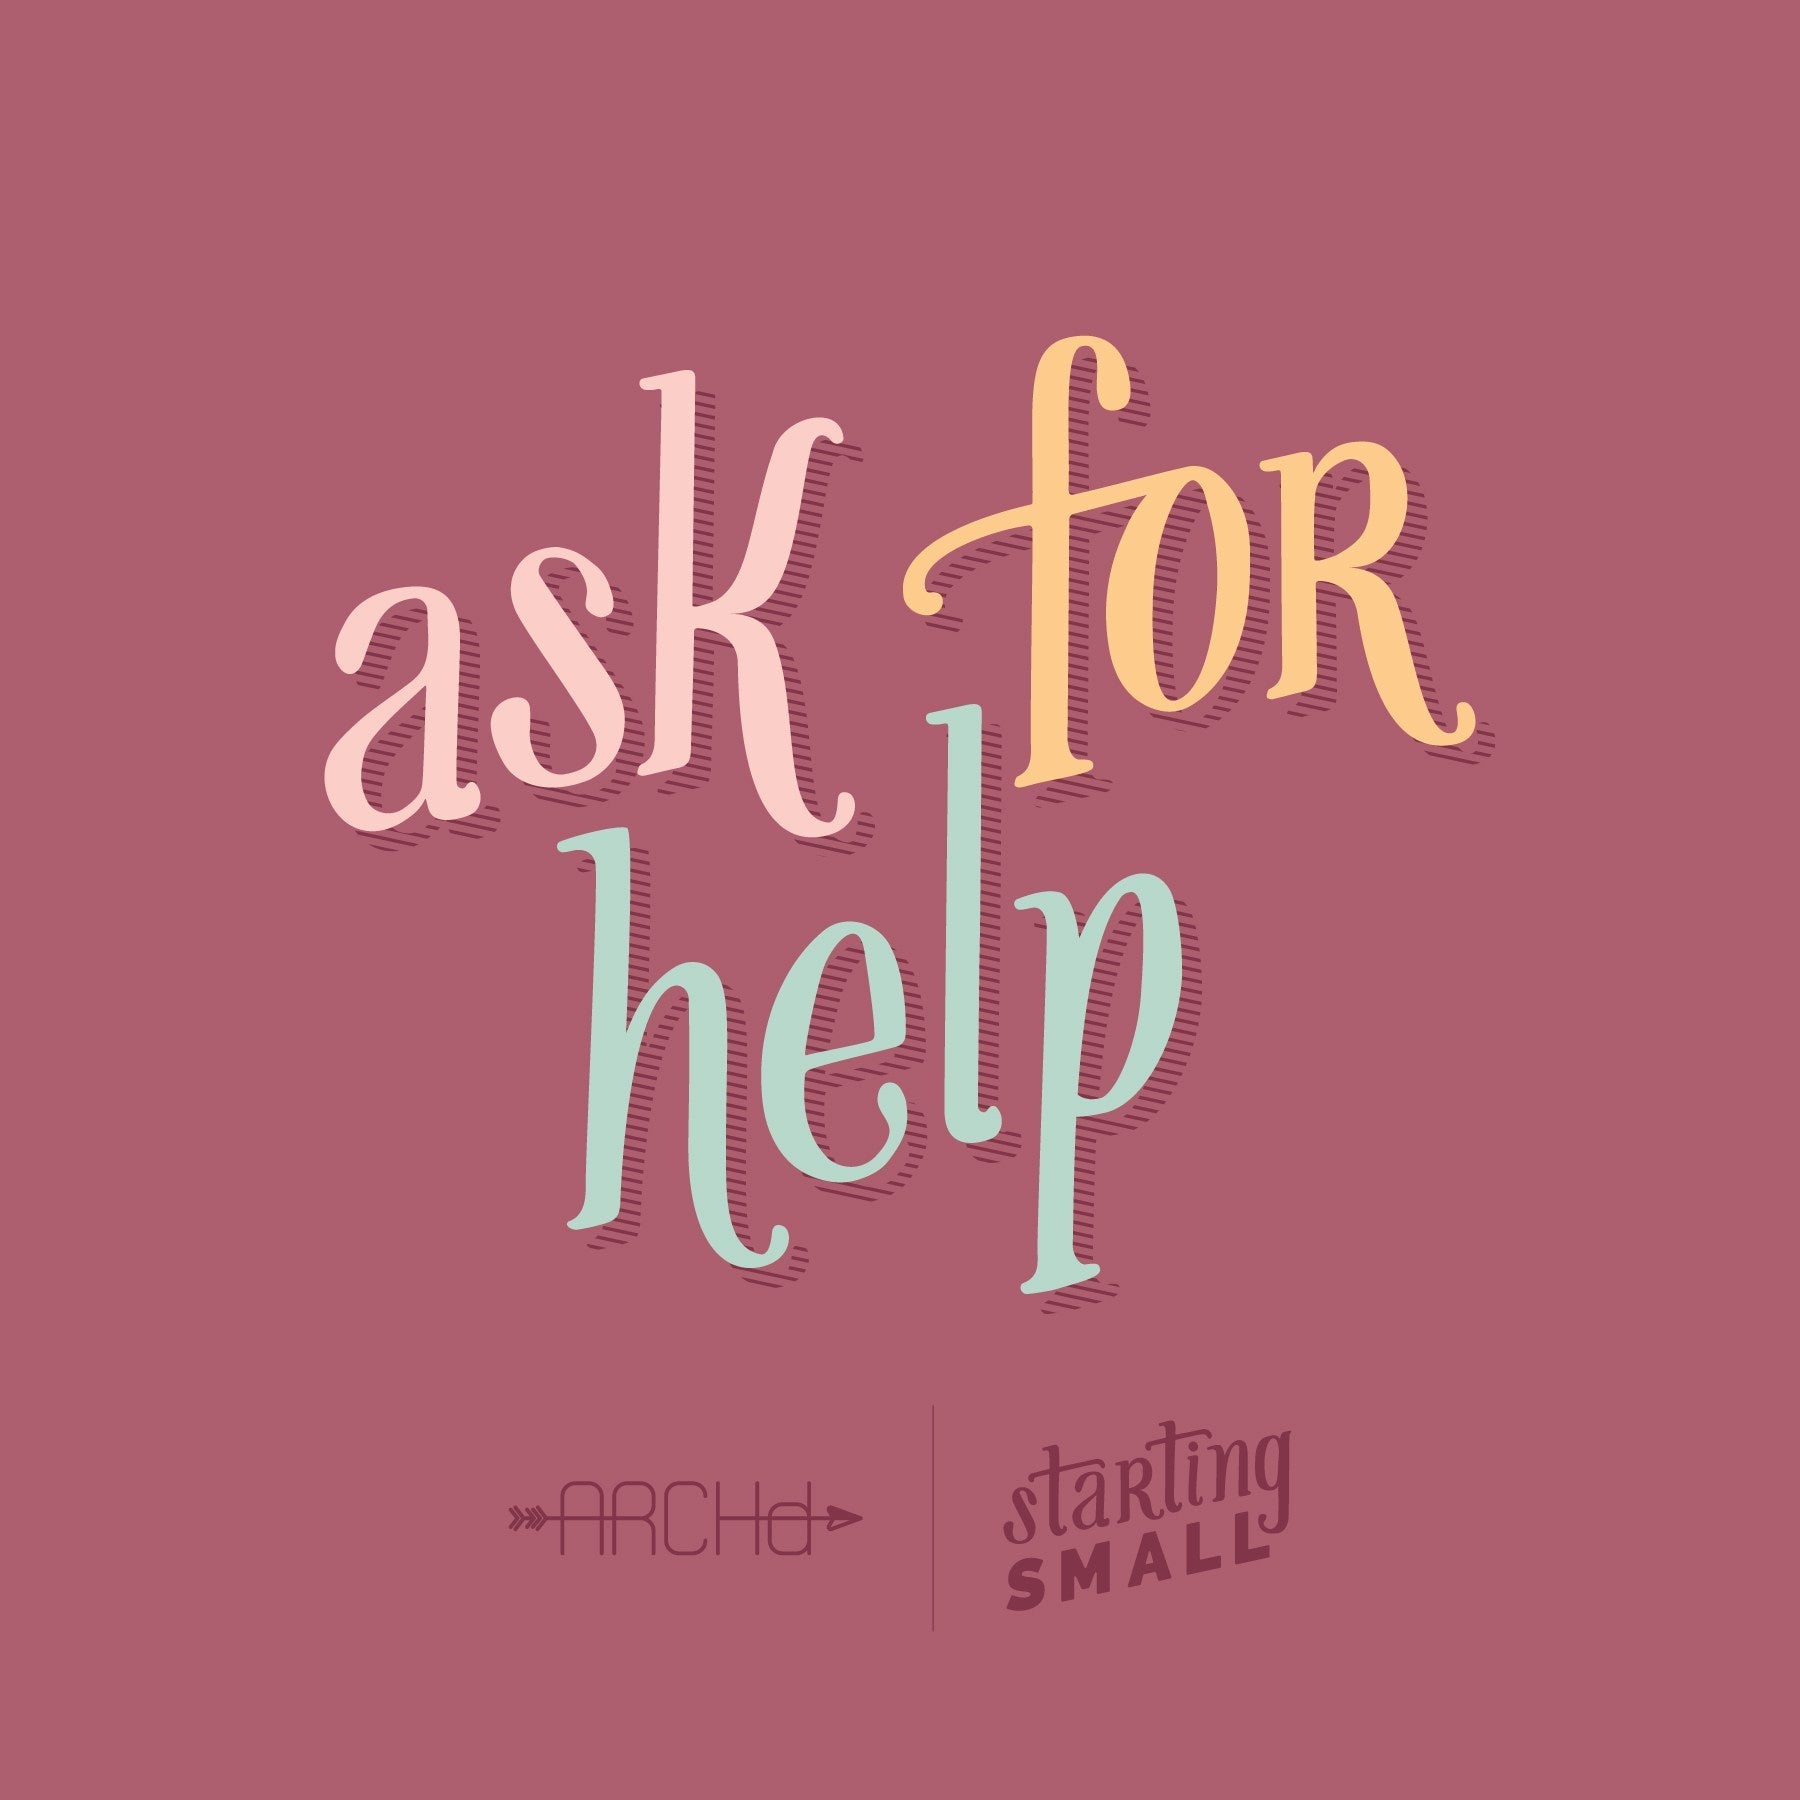 Ask For Help Starting Small a blog series by ARCHd about the adventures of starting a small business